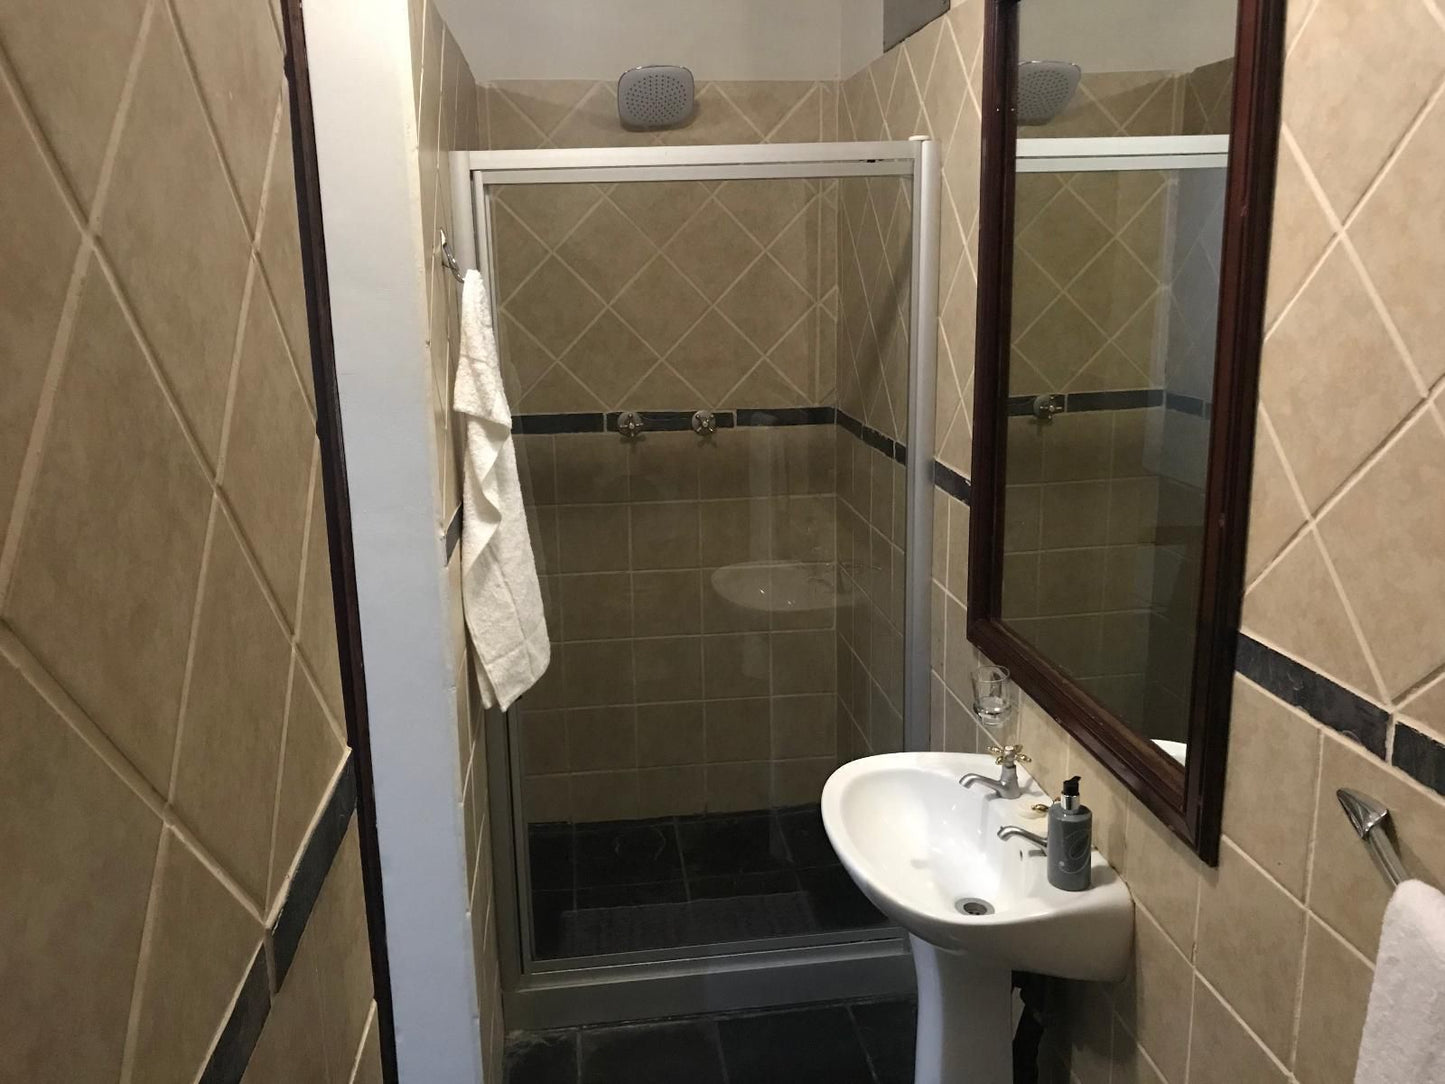 Motseng Guest House Bayswater Bloemfontein Free State South Africa Bathroom